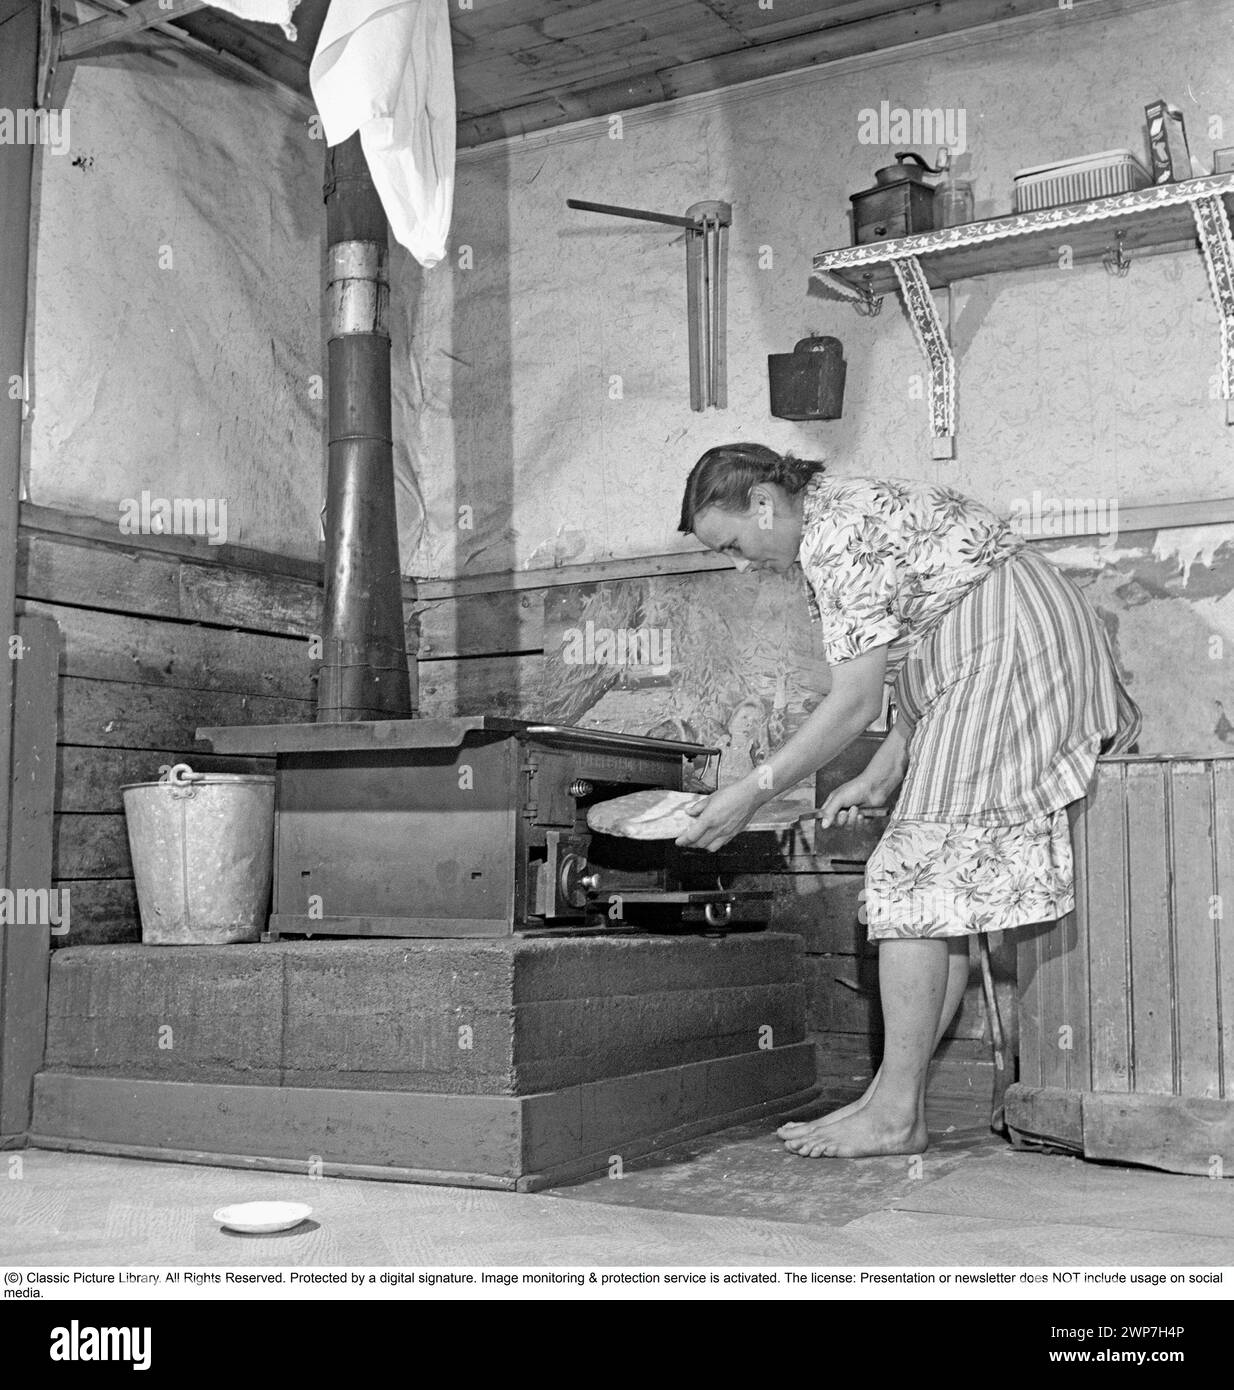 Baking bread 1949. Interior of a kitchen with a woman baking bread. A rural kitchen in Lapland Sweden 1949 with a cast-iron kitchen stove heated with firewood. Note the woman's feet, she has no socks.  Kristoffersson ref AS84-1 Stock Photo